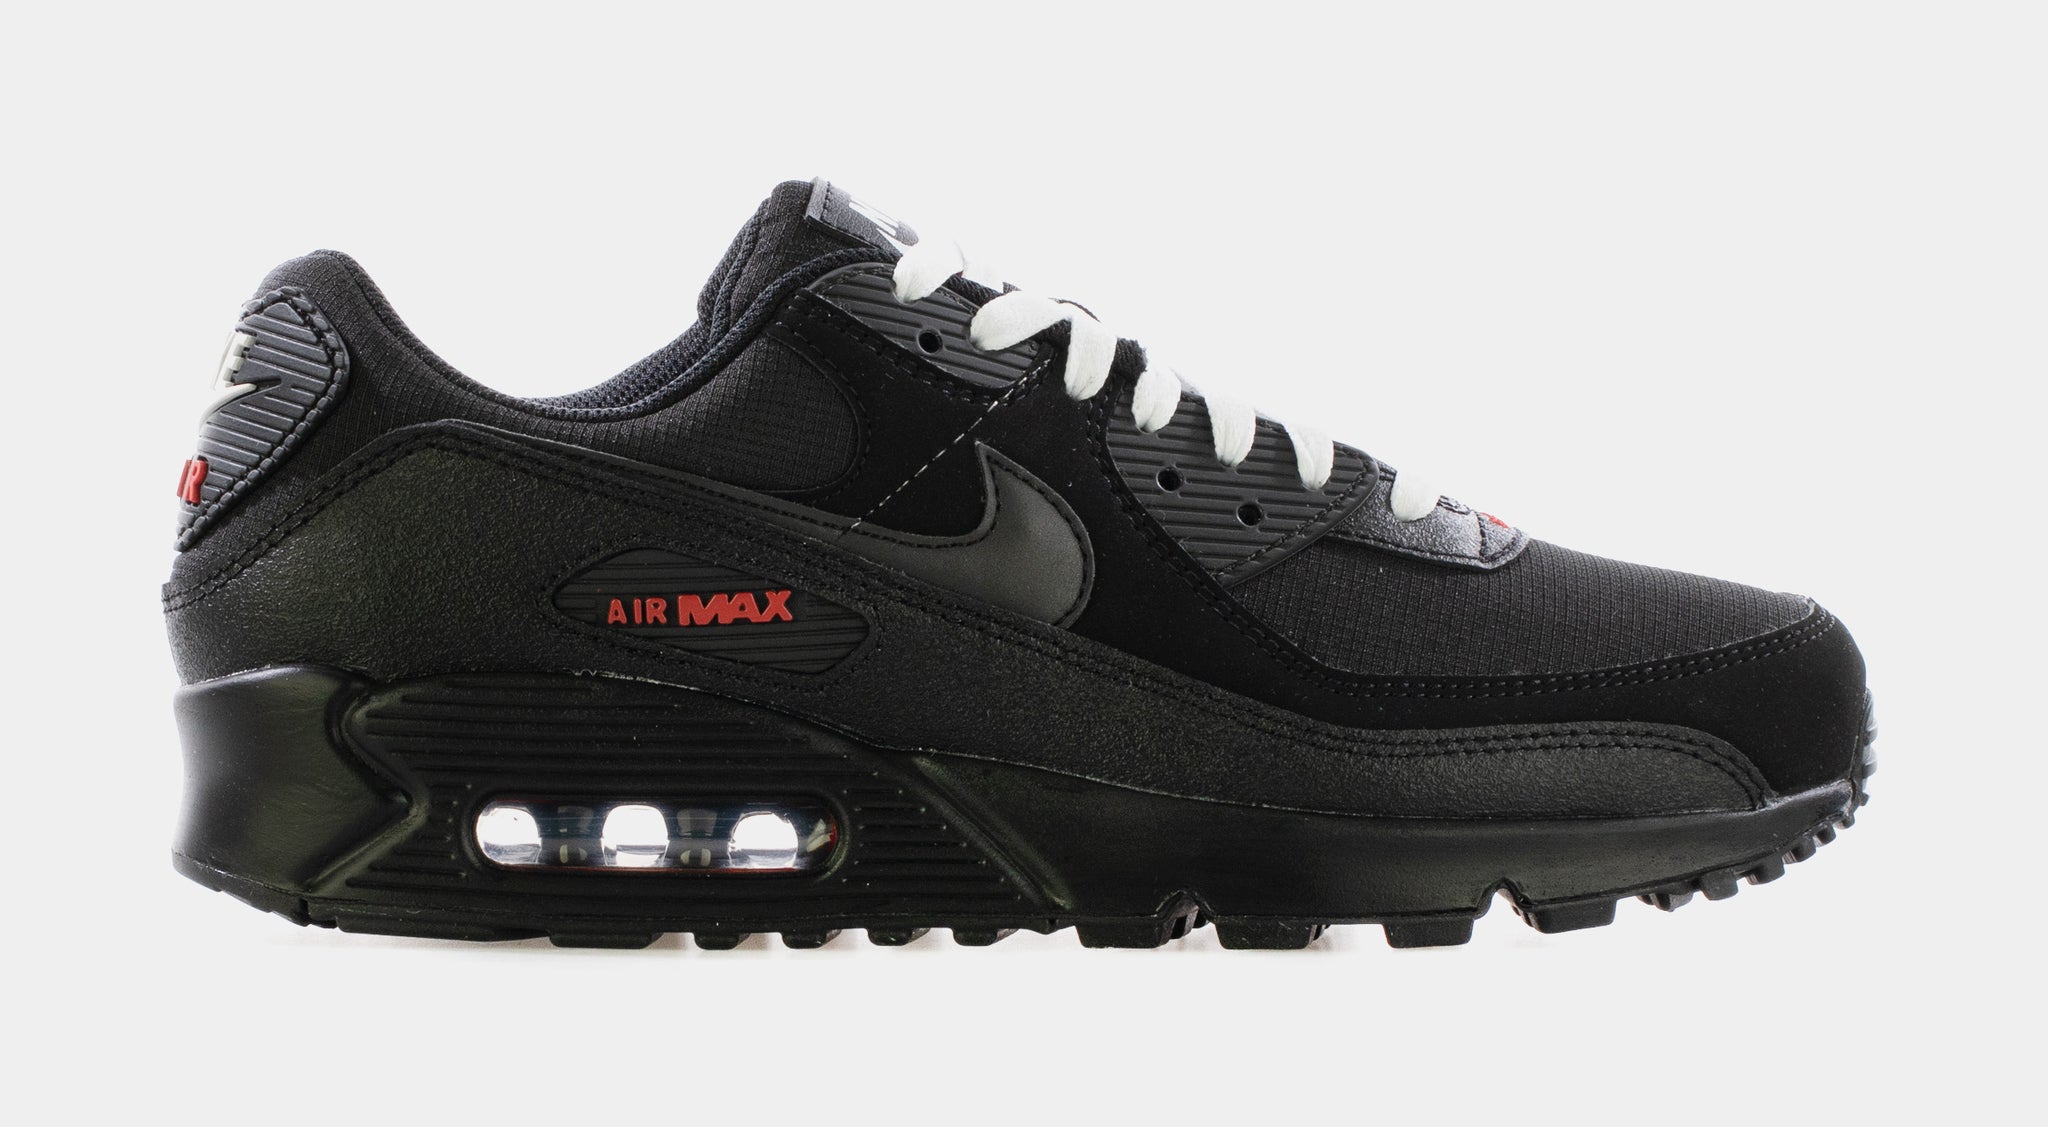 Air Max 90 Mens Lifestyle Shoes (Black/Sport Red/White)